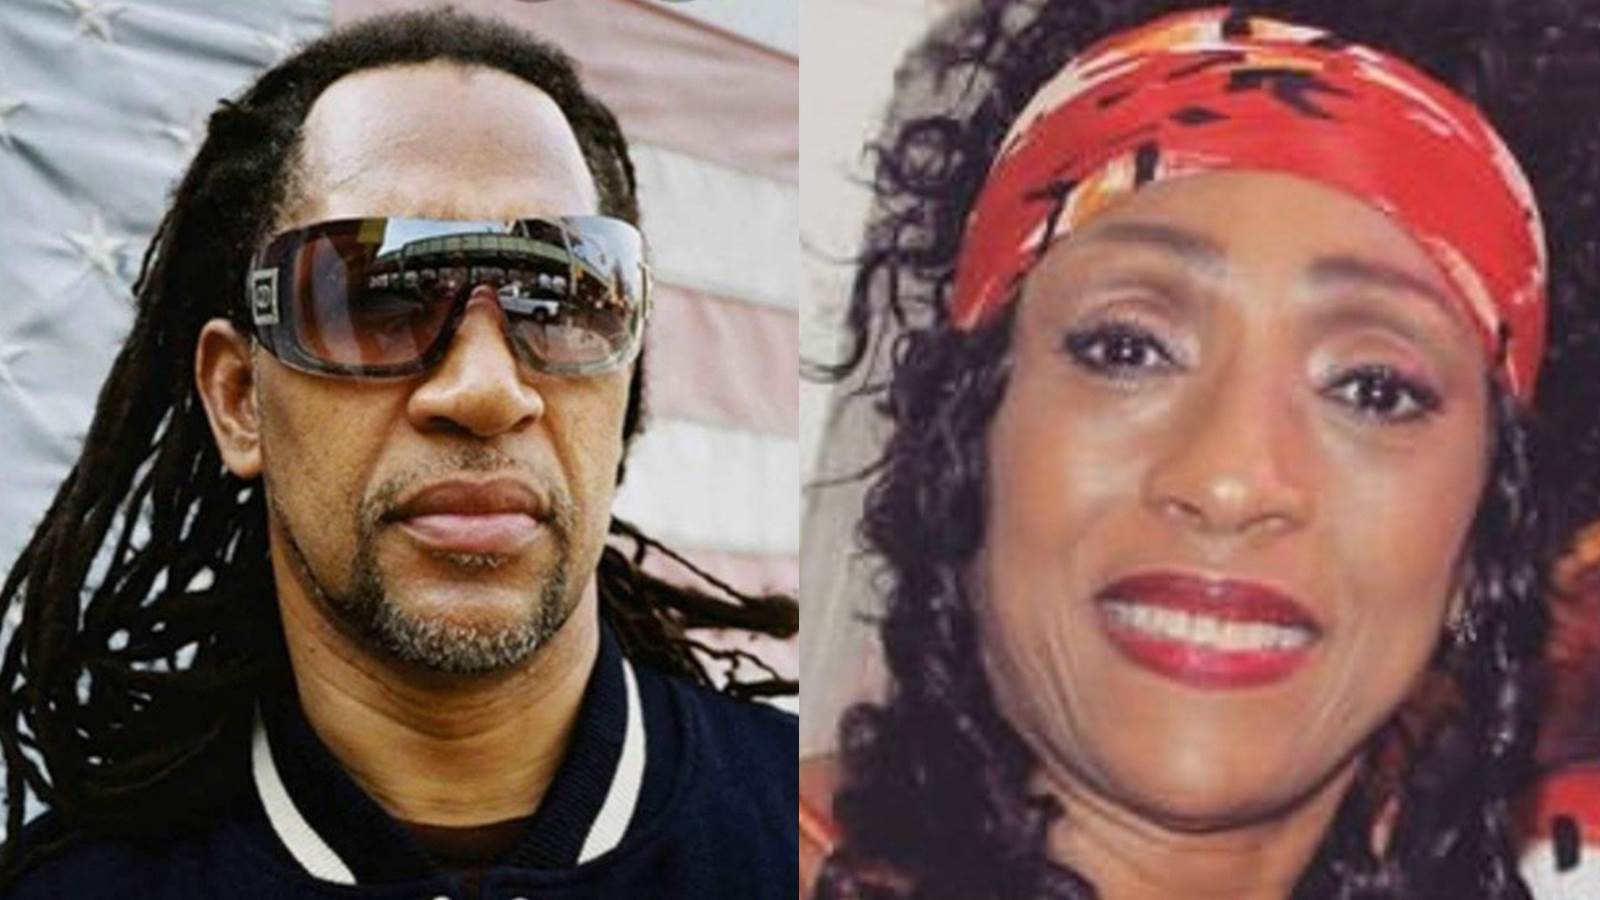 2 close up images, on the left DJ Kool Herc has on black sunglasses, a bomber jacket and stands closely in front of a worn american flag. On the right Cindy is smiling in a red scarf headband pushing her curly hair back and red lipstick. 